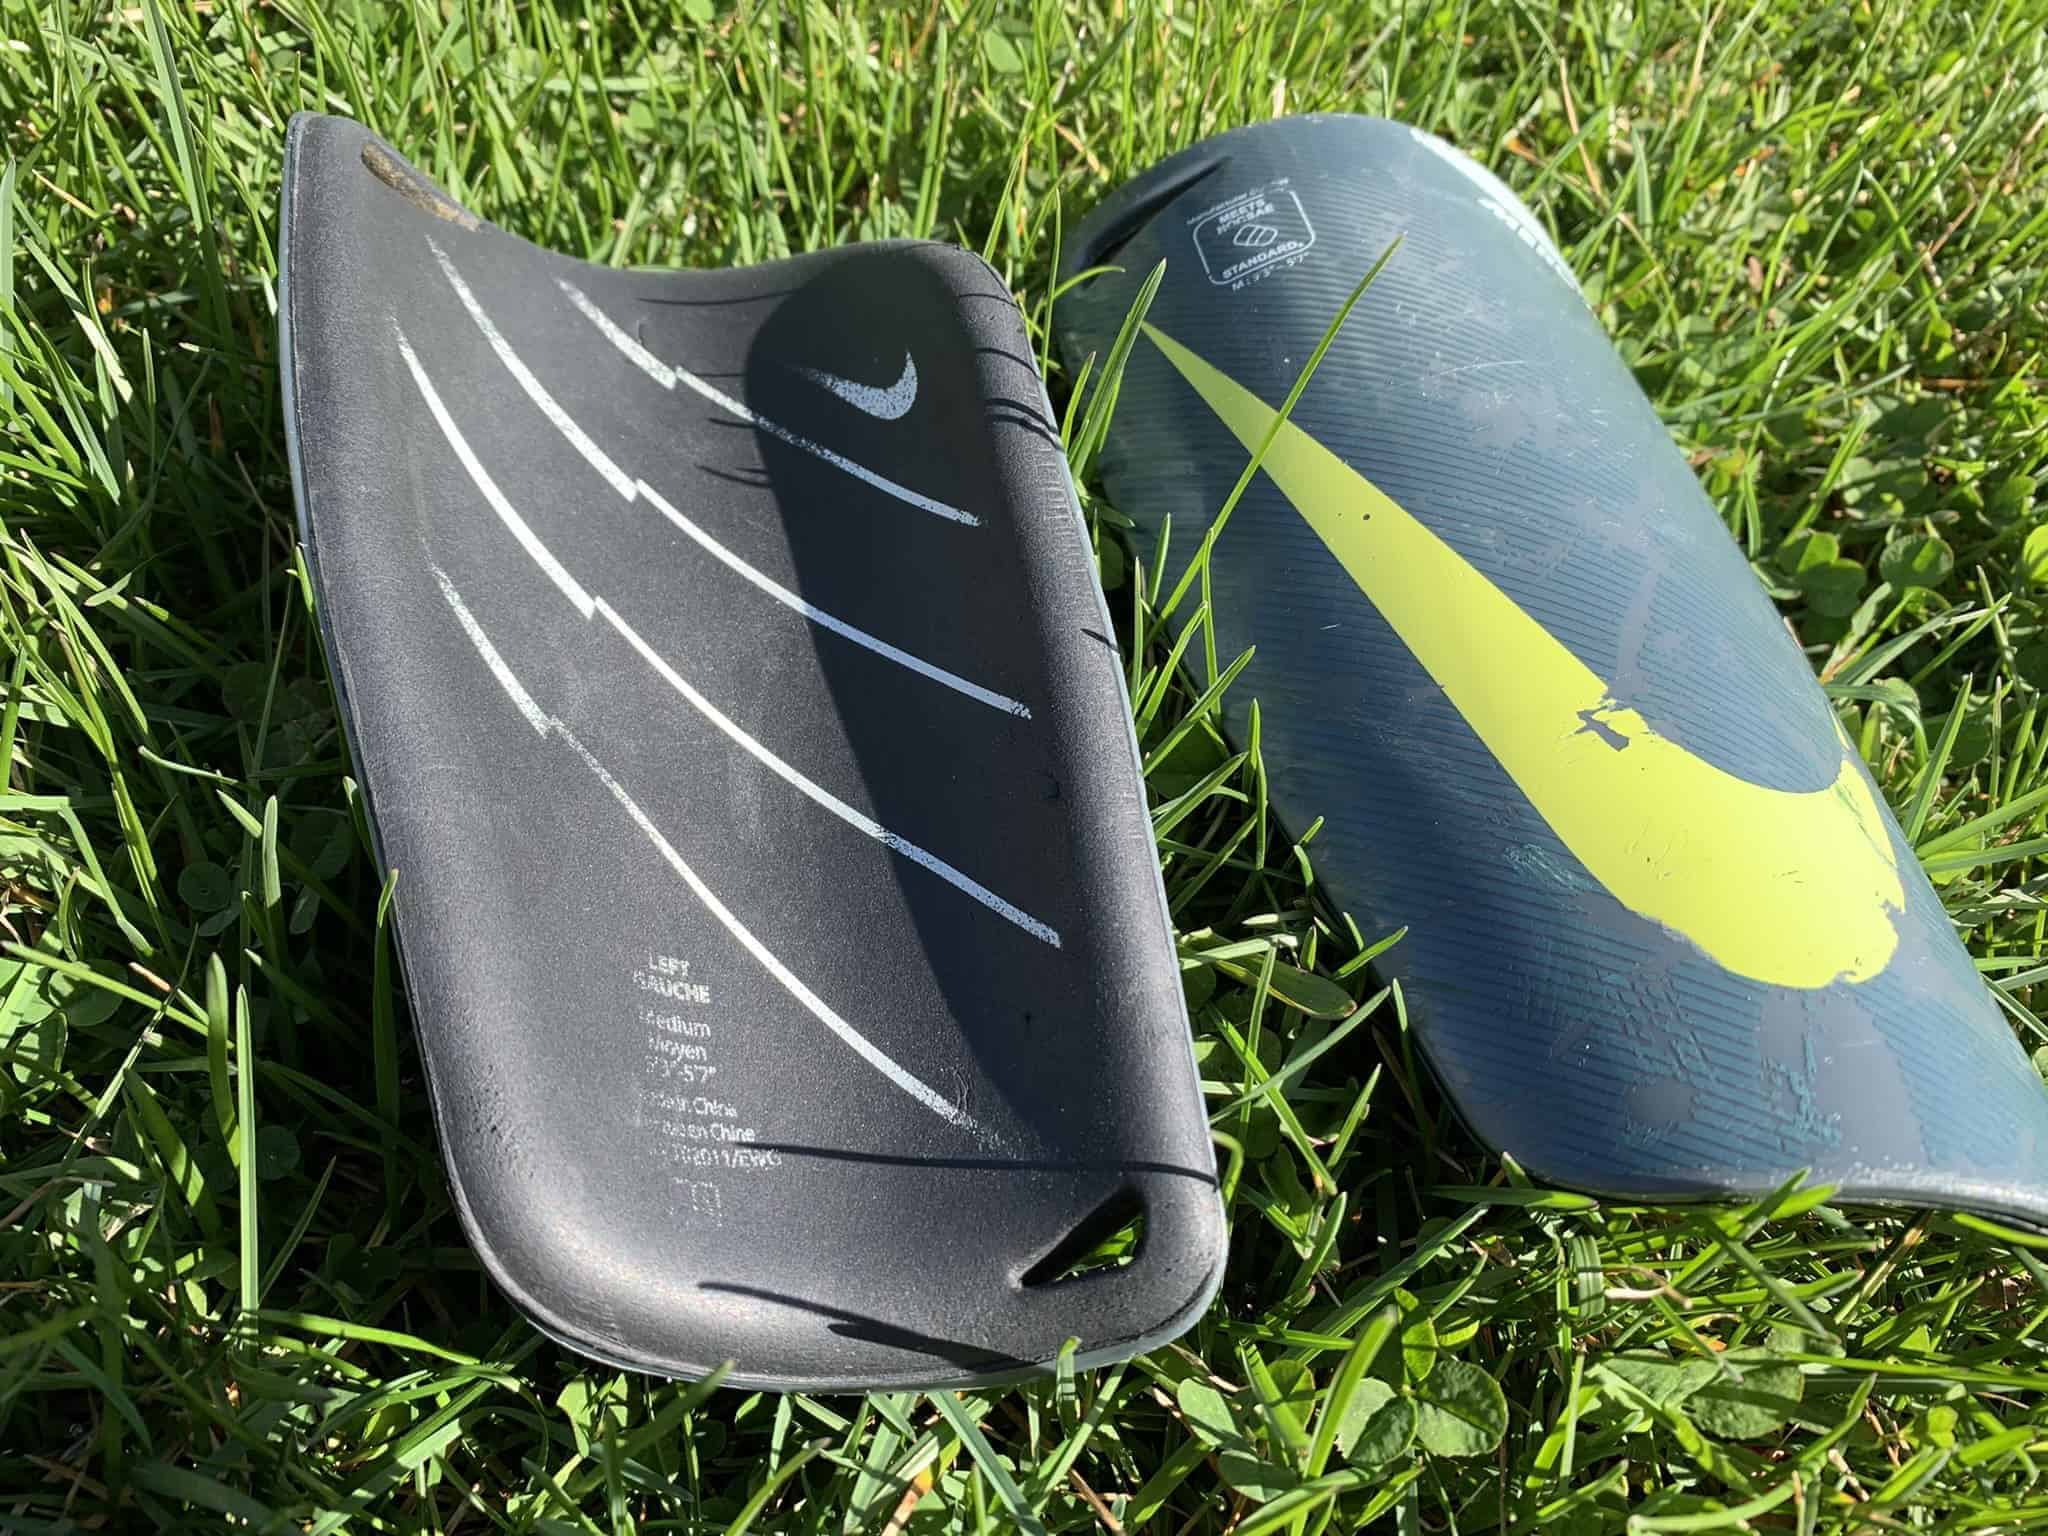 Two Nike soccer shin guards. One shows the inside and the other shows the outside with a yellow-green Nike swoosh symbol.